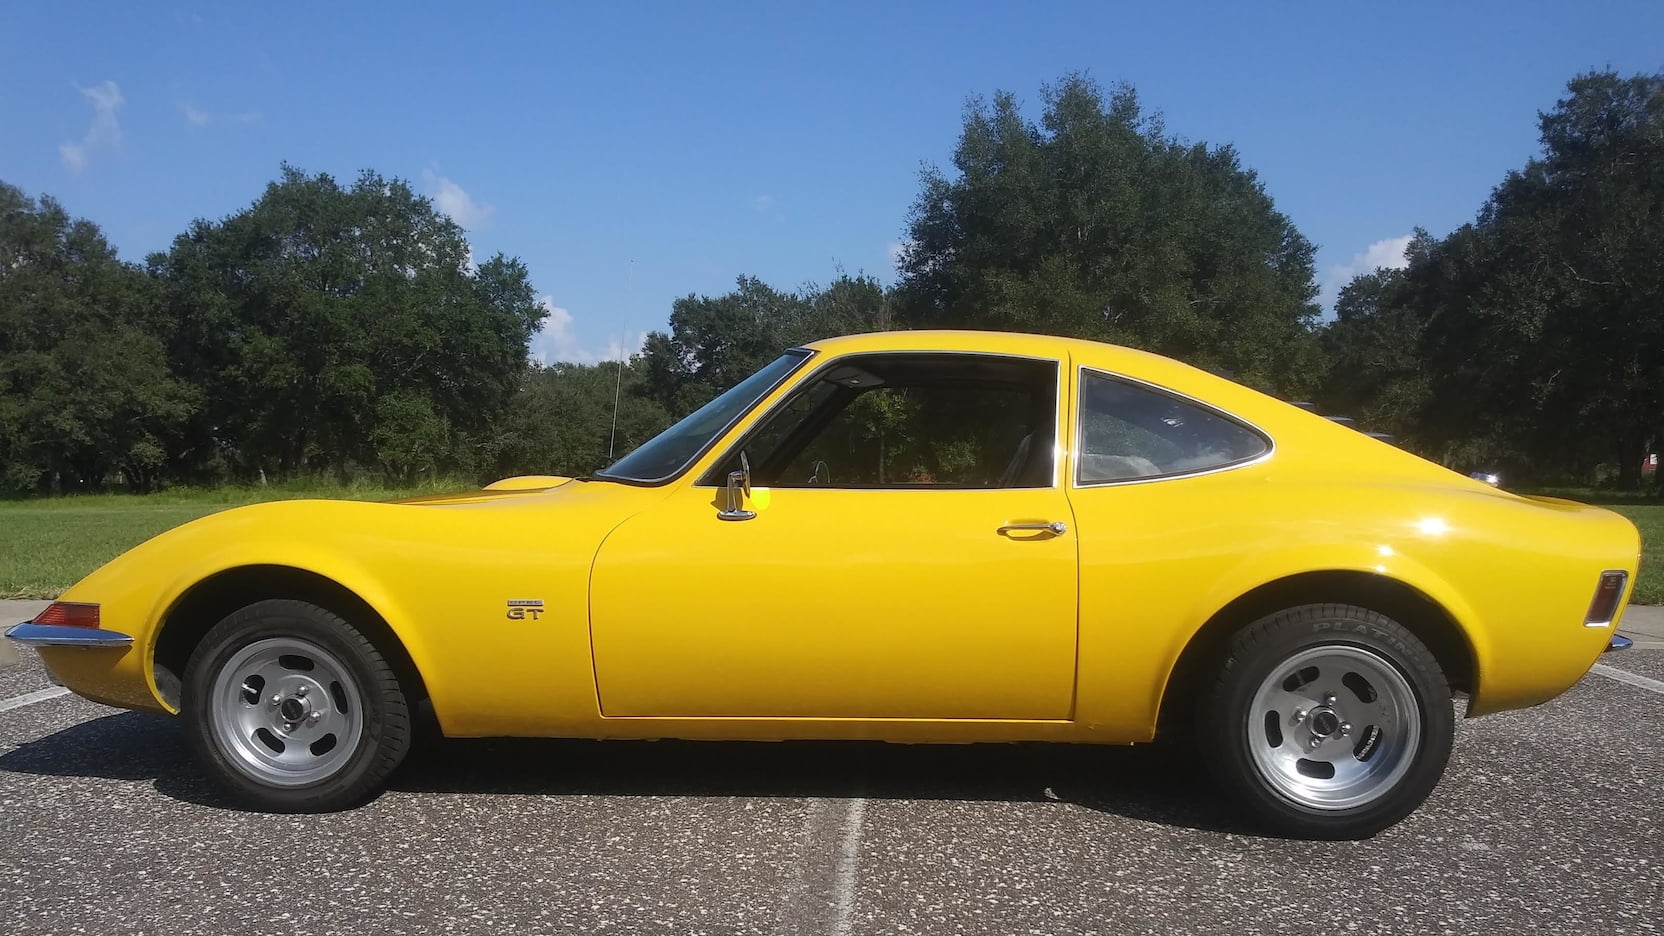 Opel GT exterior - Side Profile